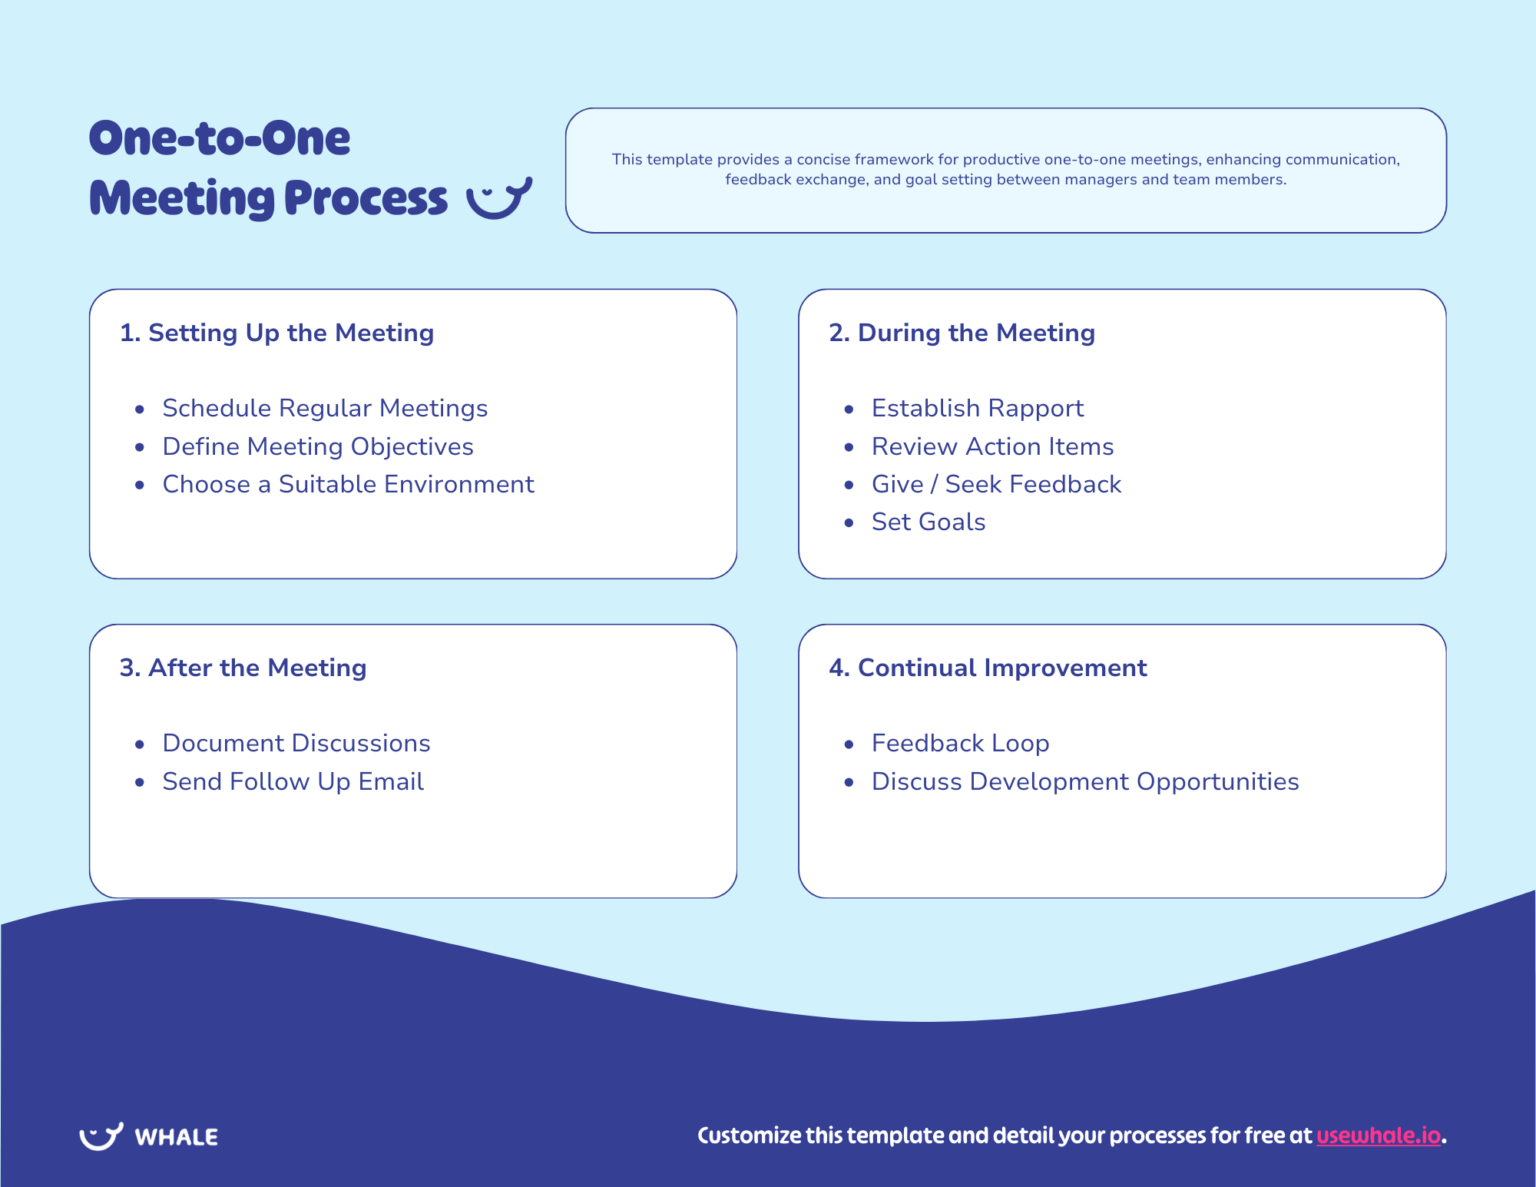 Slide template for one-to-one meetings, featuring four numbered steps for effective discussions and feedback between managers and team members.